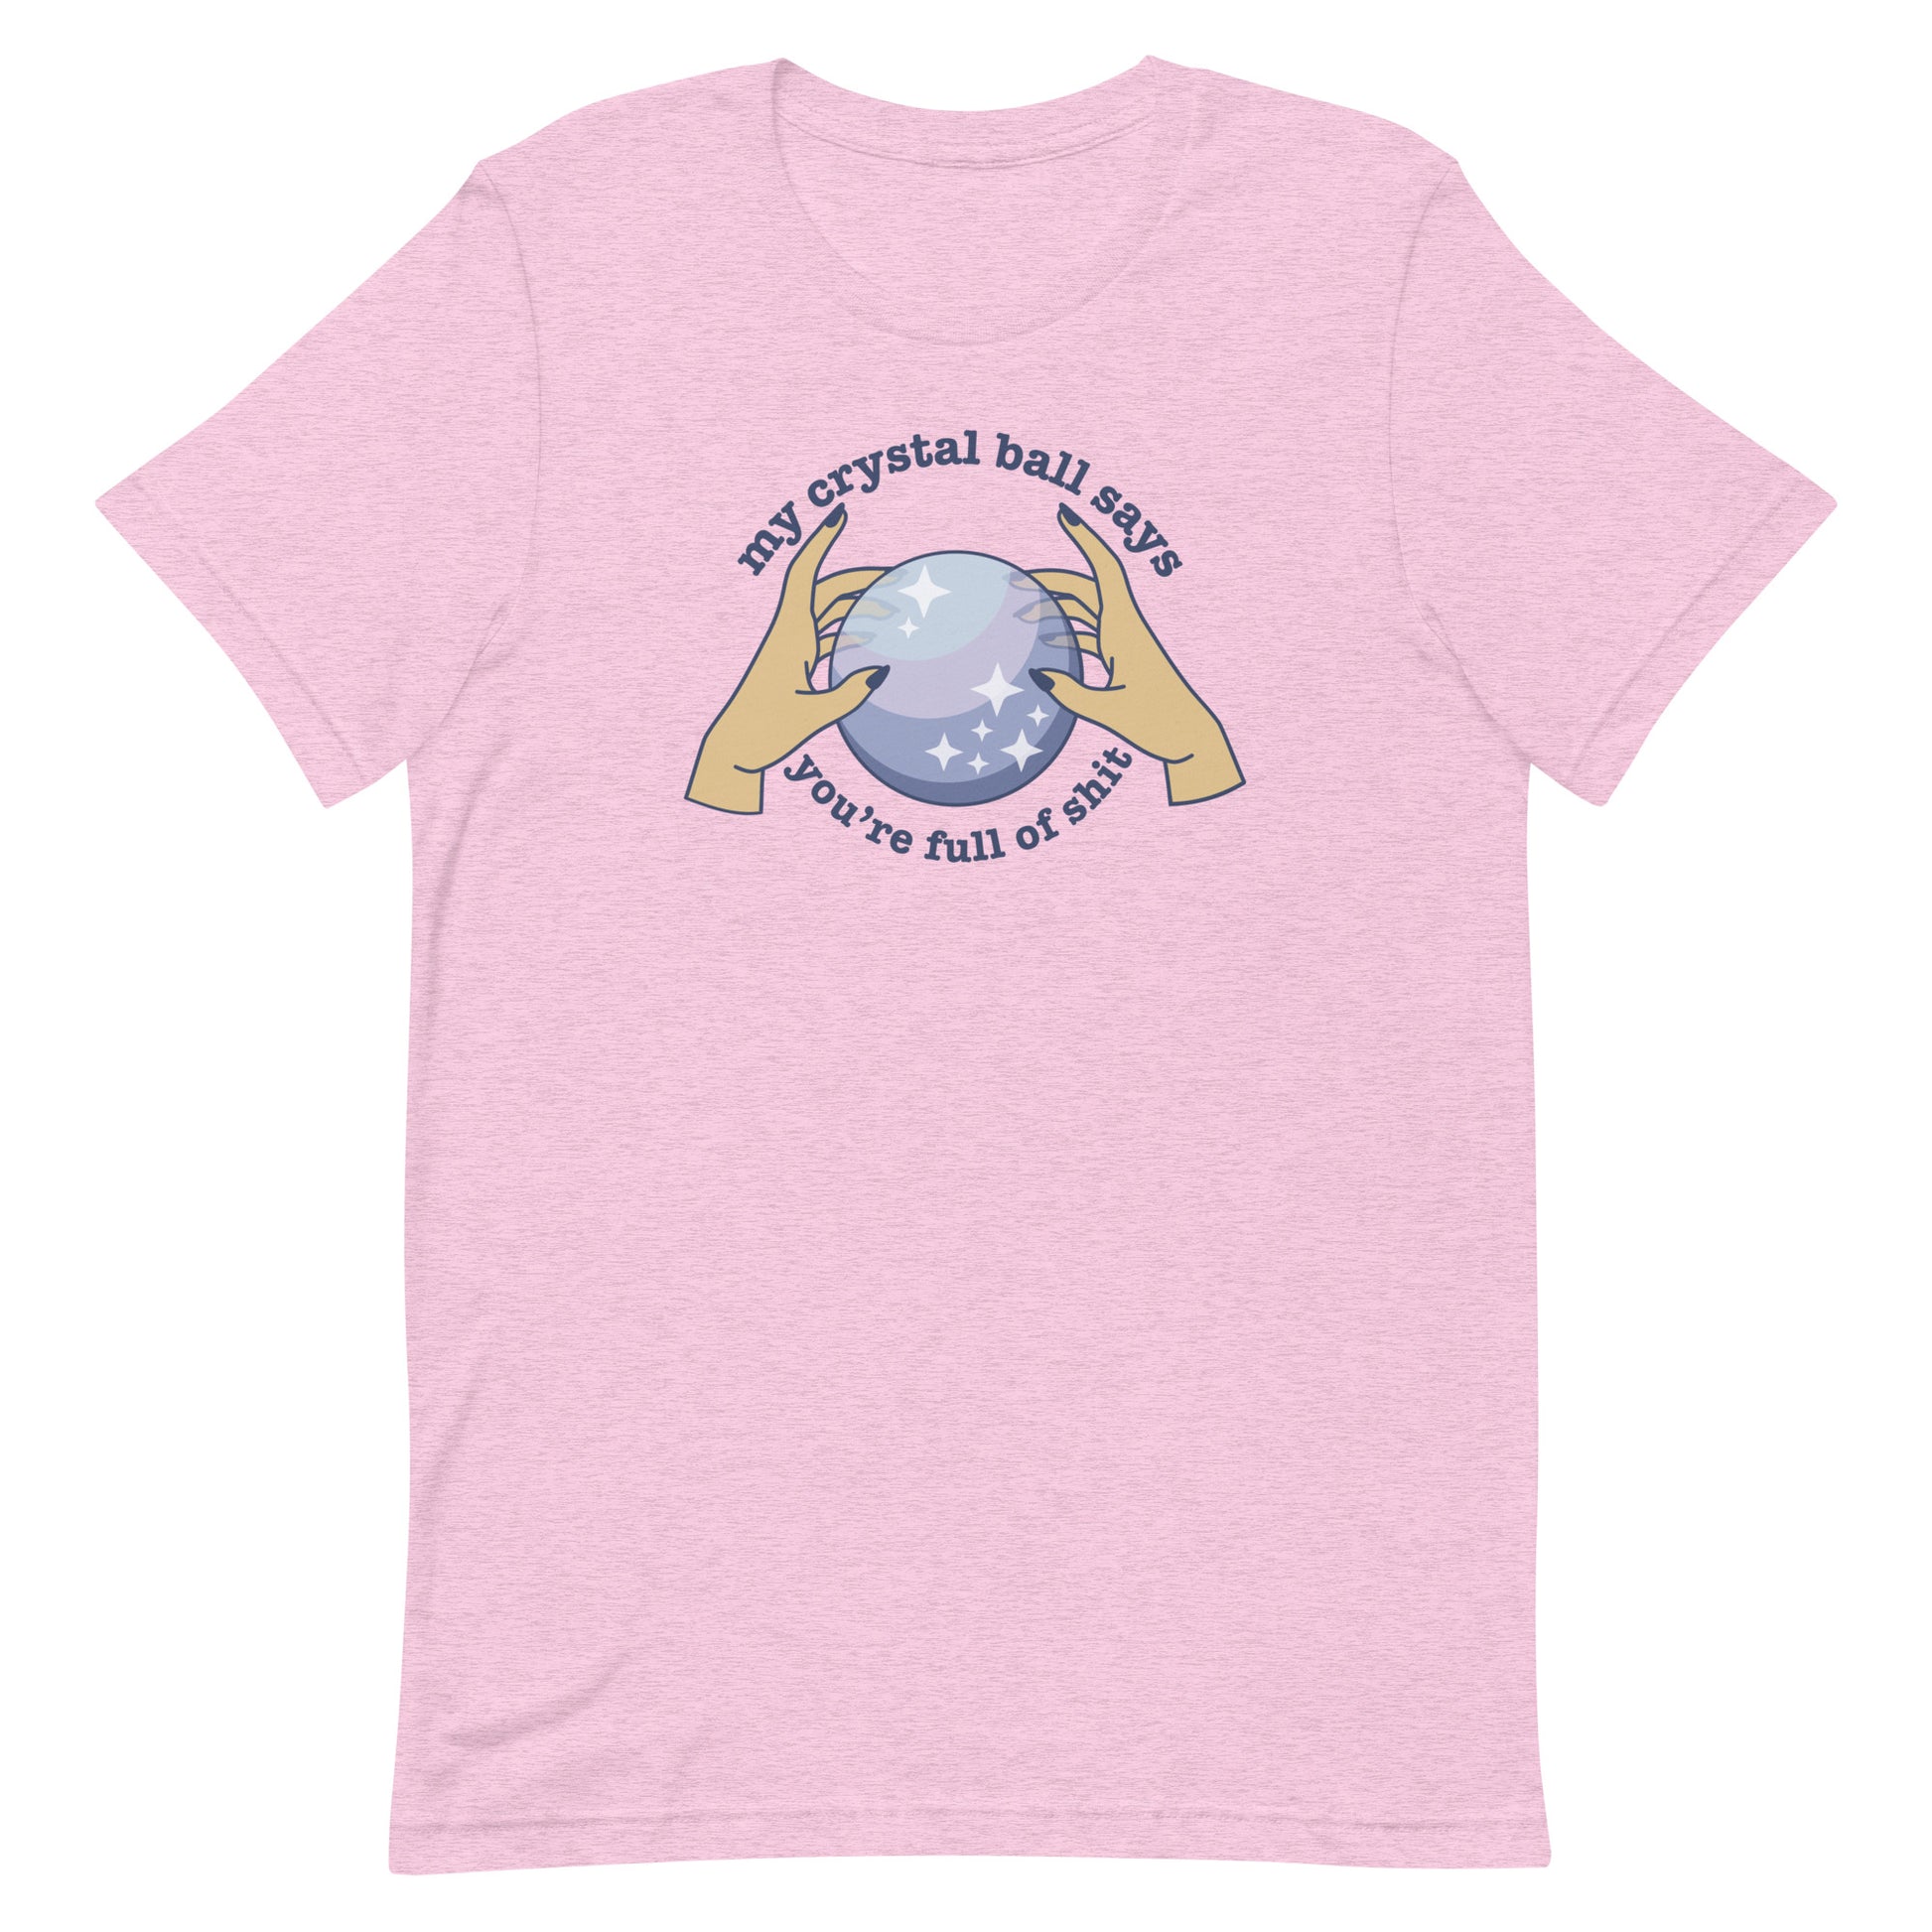 A heathered pink crewneck t-shirt with an image of two hands on a crystal ball and text that reads "My crystal ball says you're full of shit"